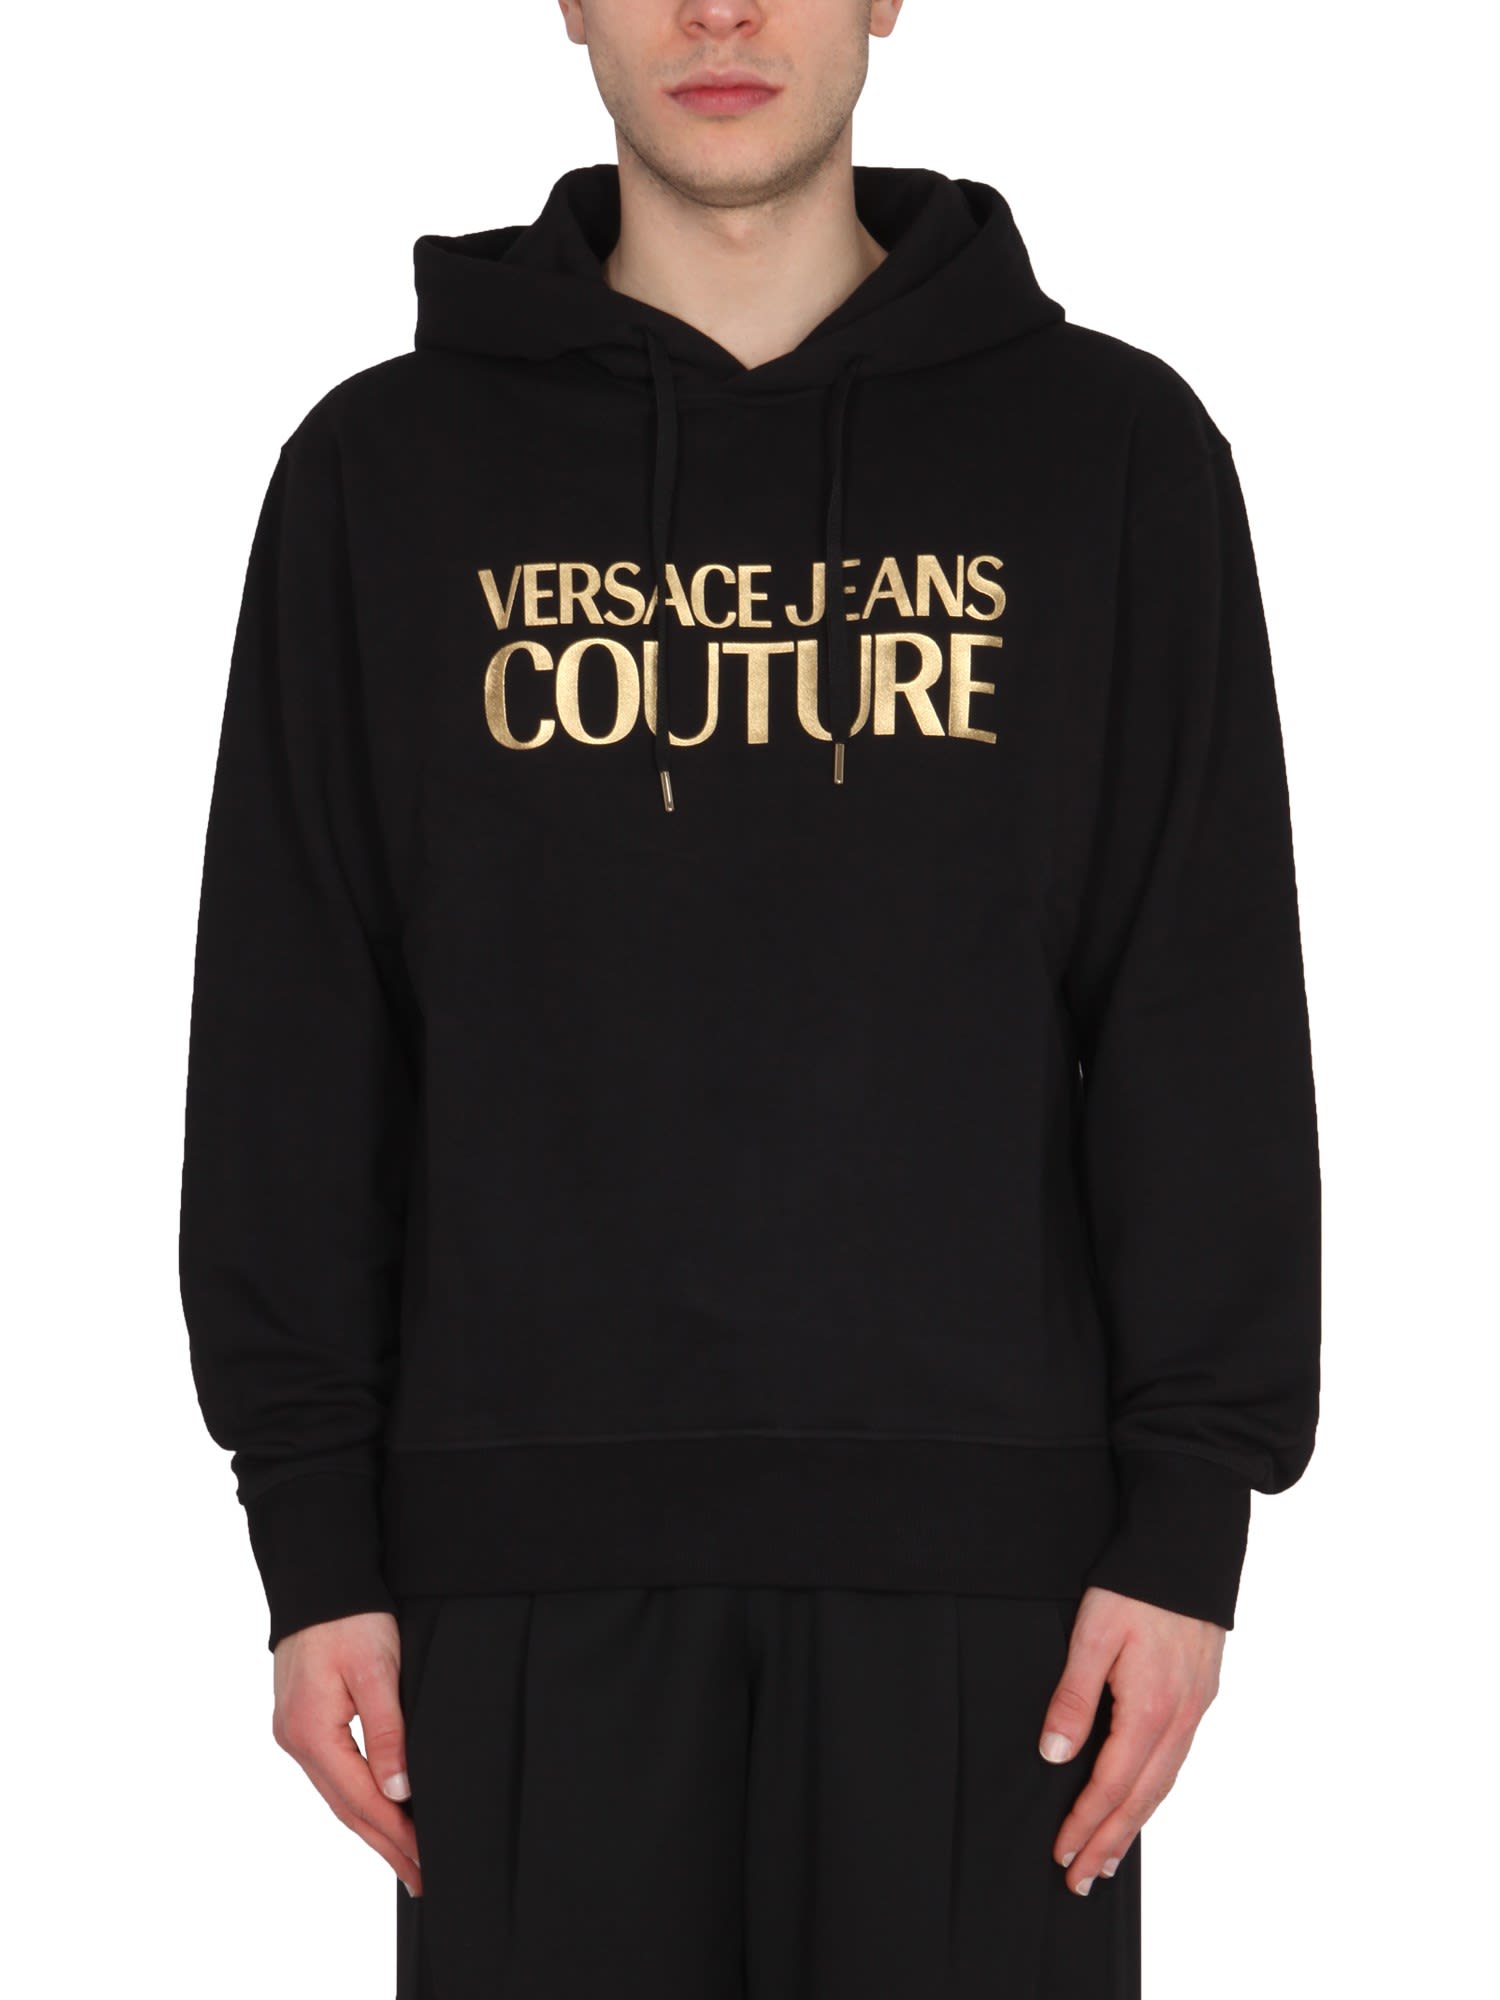 Versace Jeans Couture Sweatshirt With Thick Foil Logo